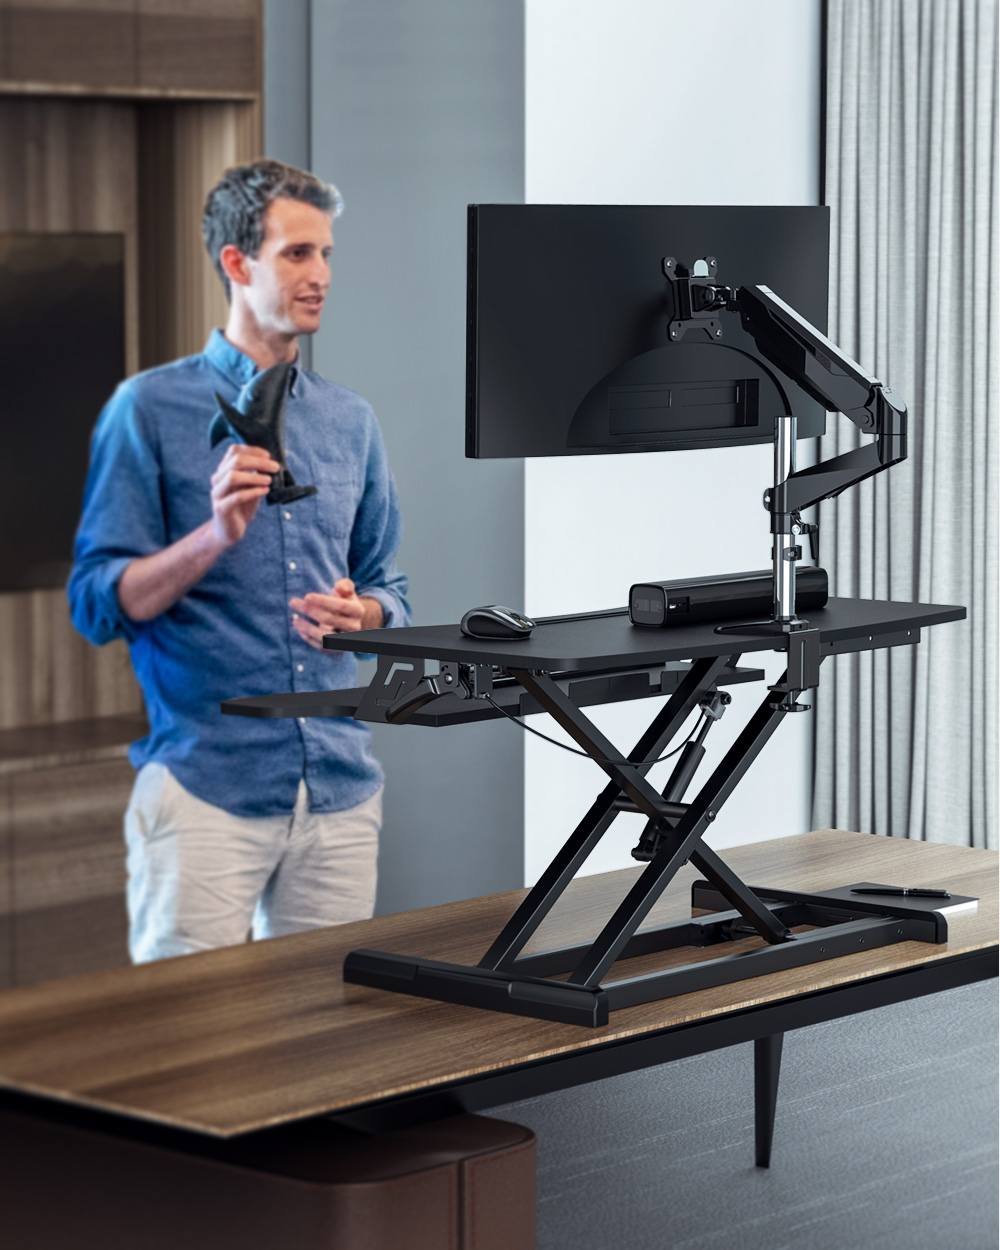 BlitzWolf® BW-MS2 Monitor Stand with Pneumatic Arm 32